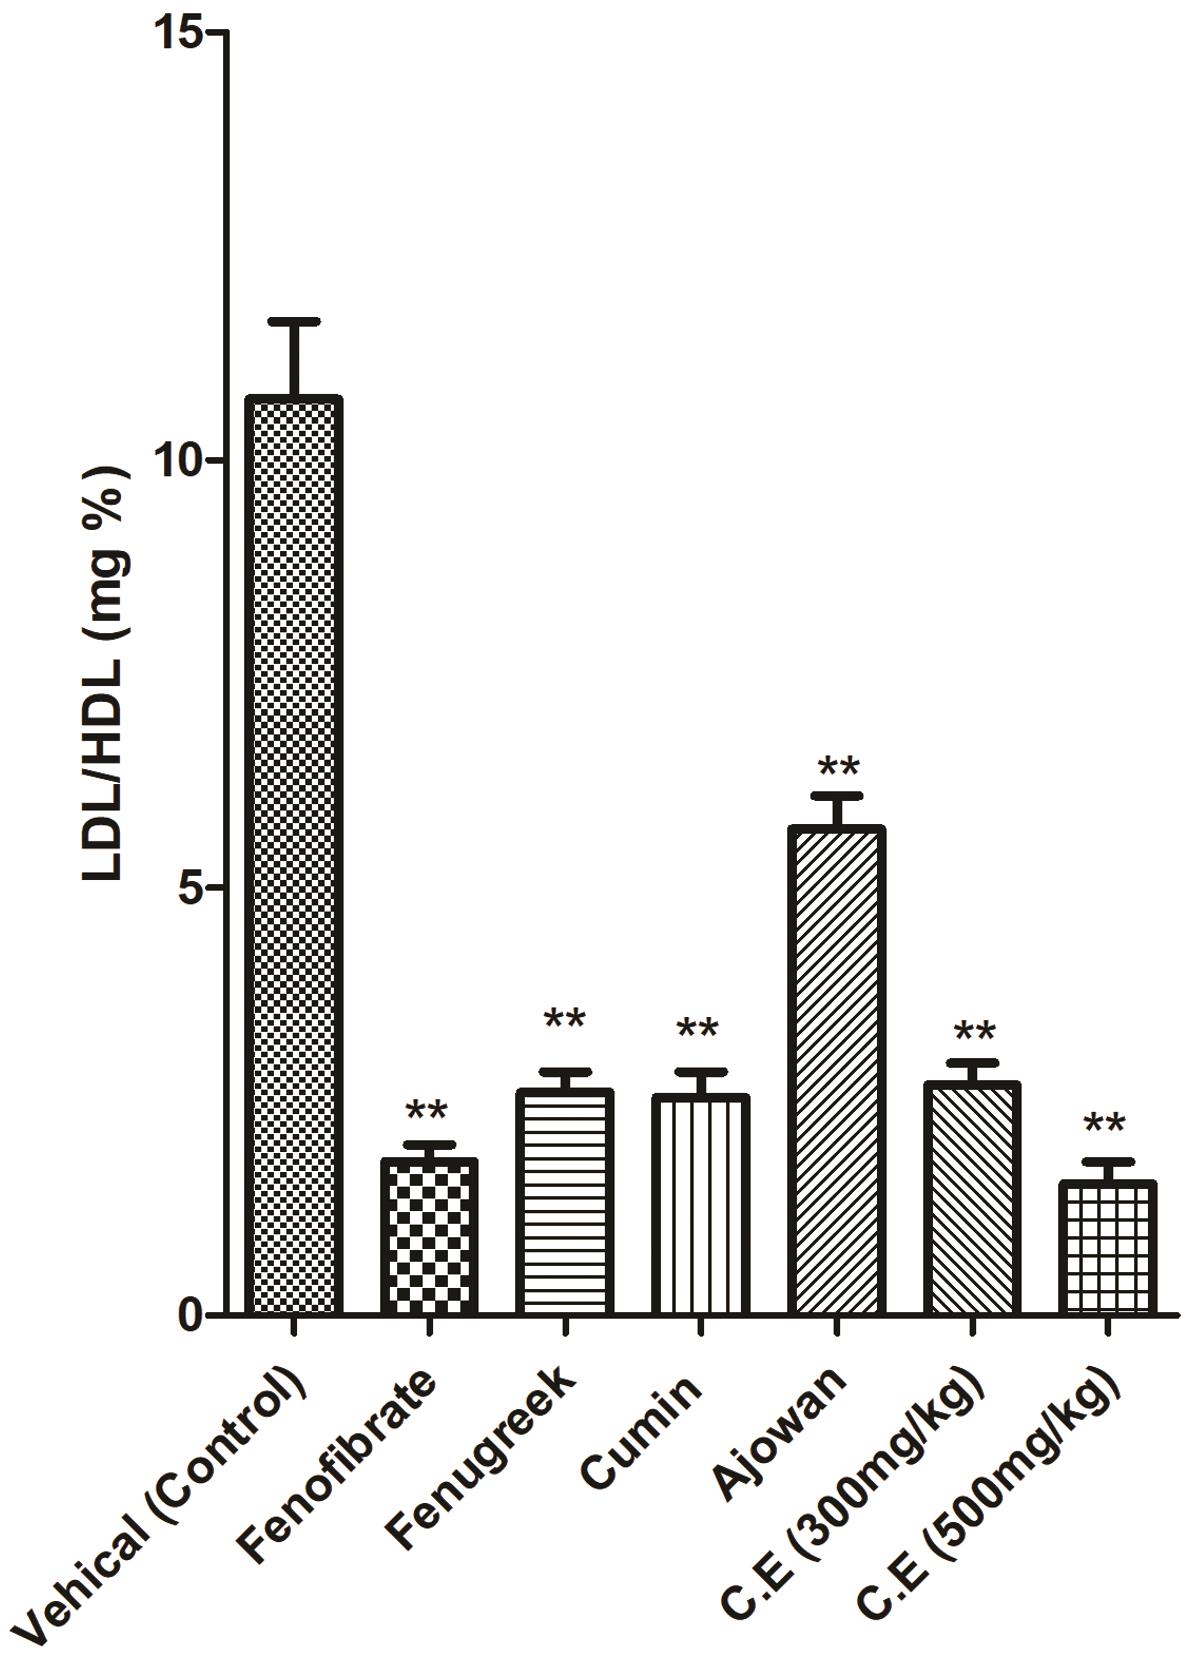 LDL/HDL (mg%) in various treated hypercholesterolemic rats.